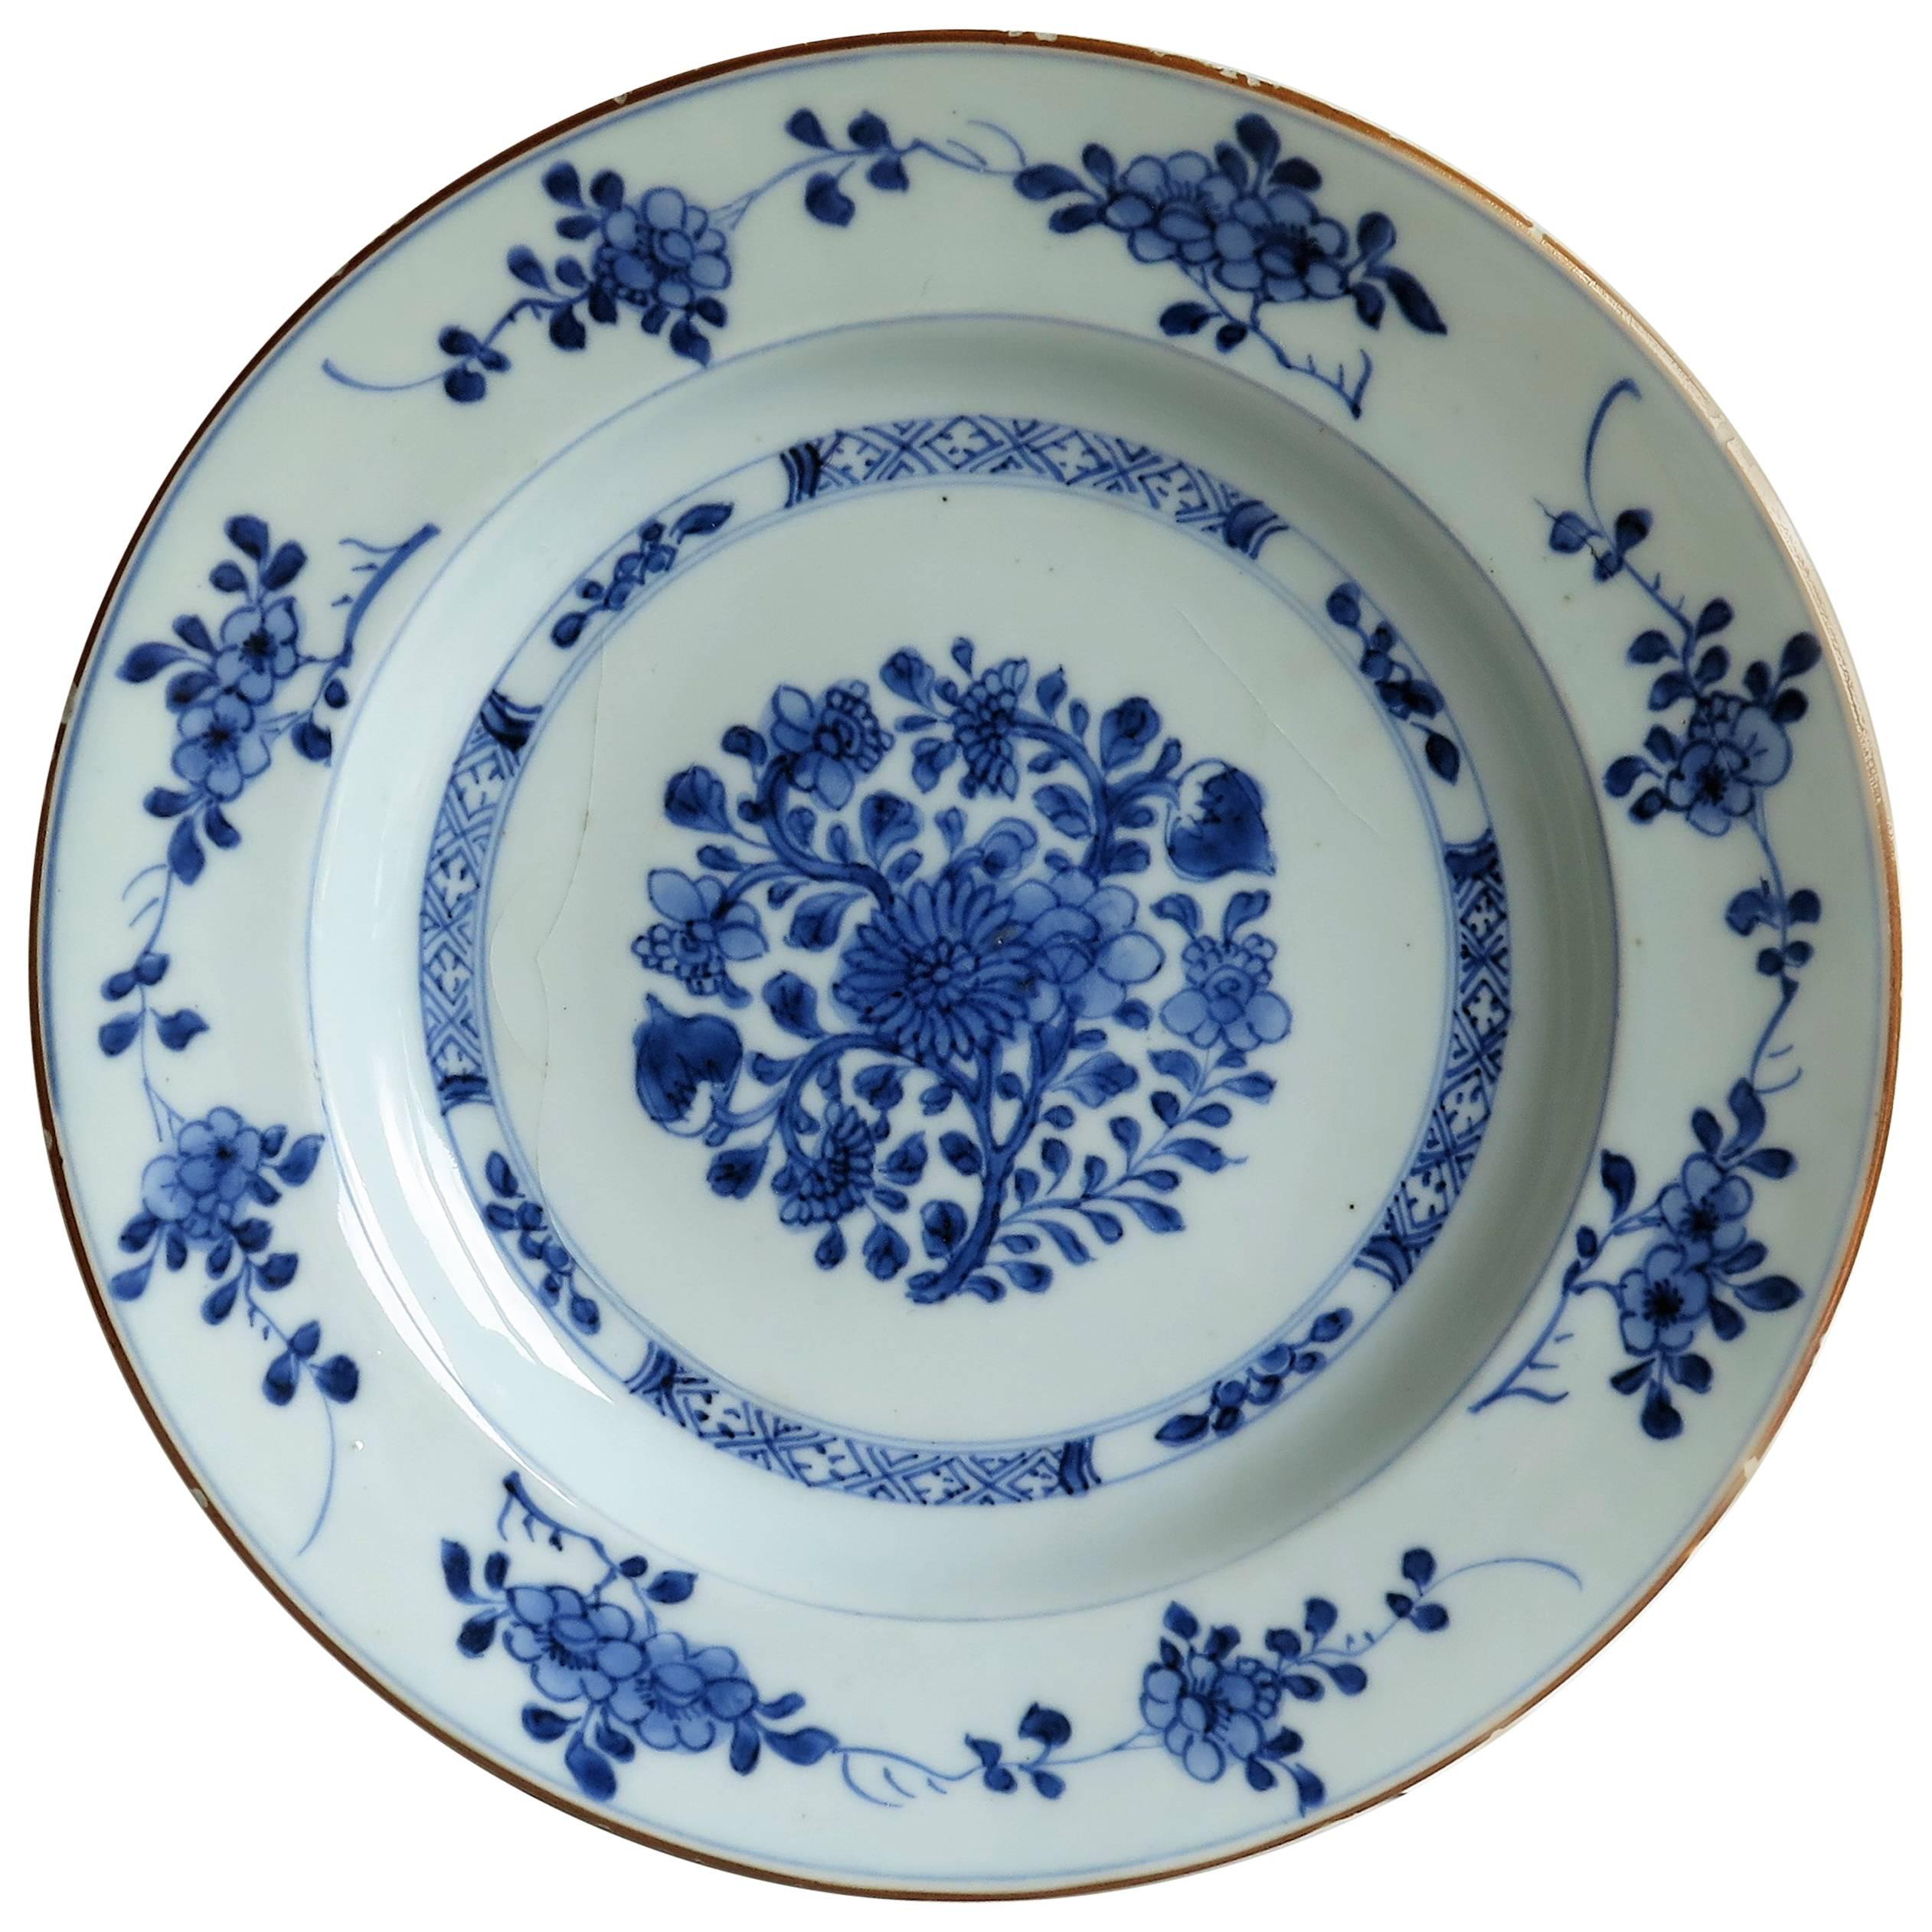 Chinese Porcelain Plate in Blue and White, Qing, Early 18th Century, circa 1735